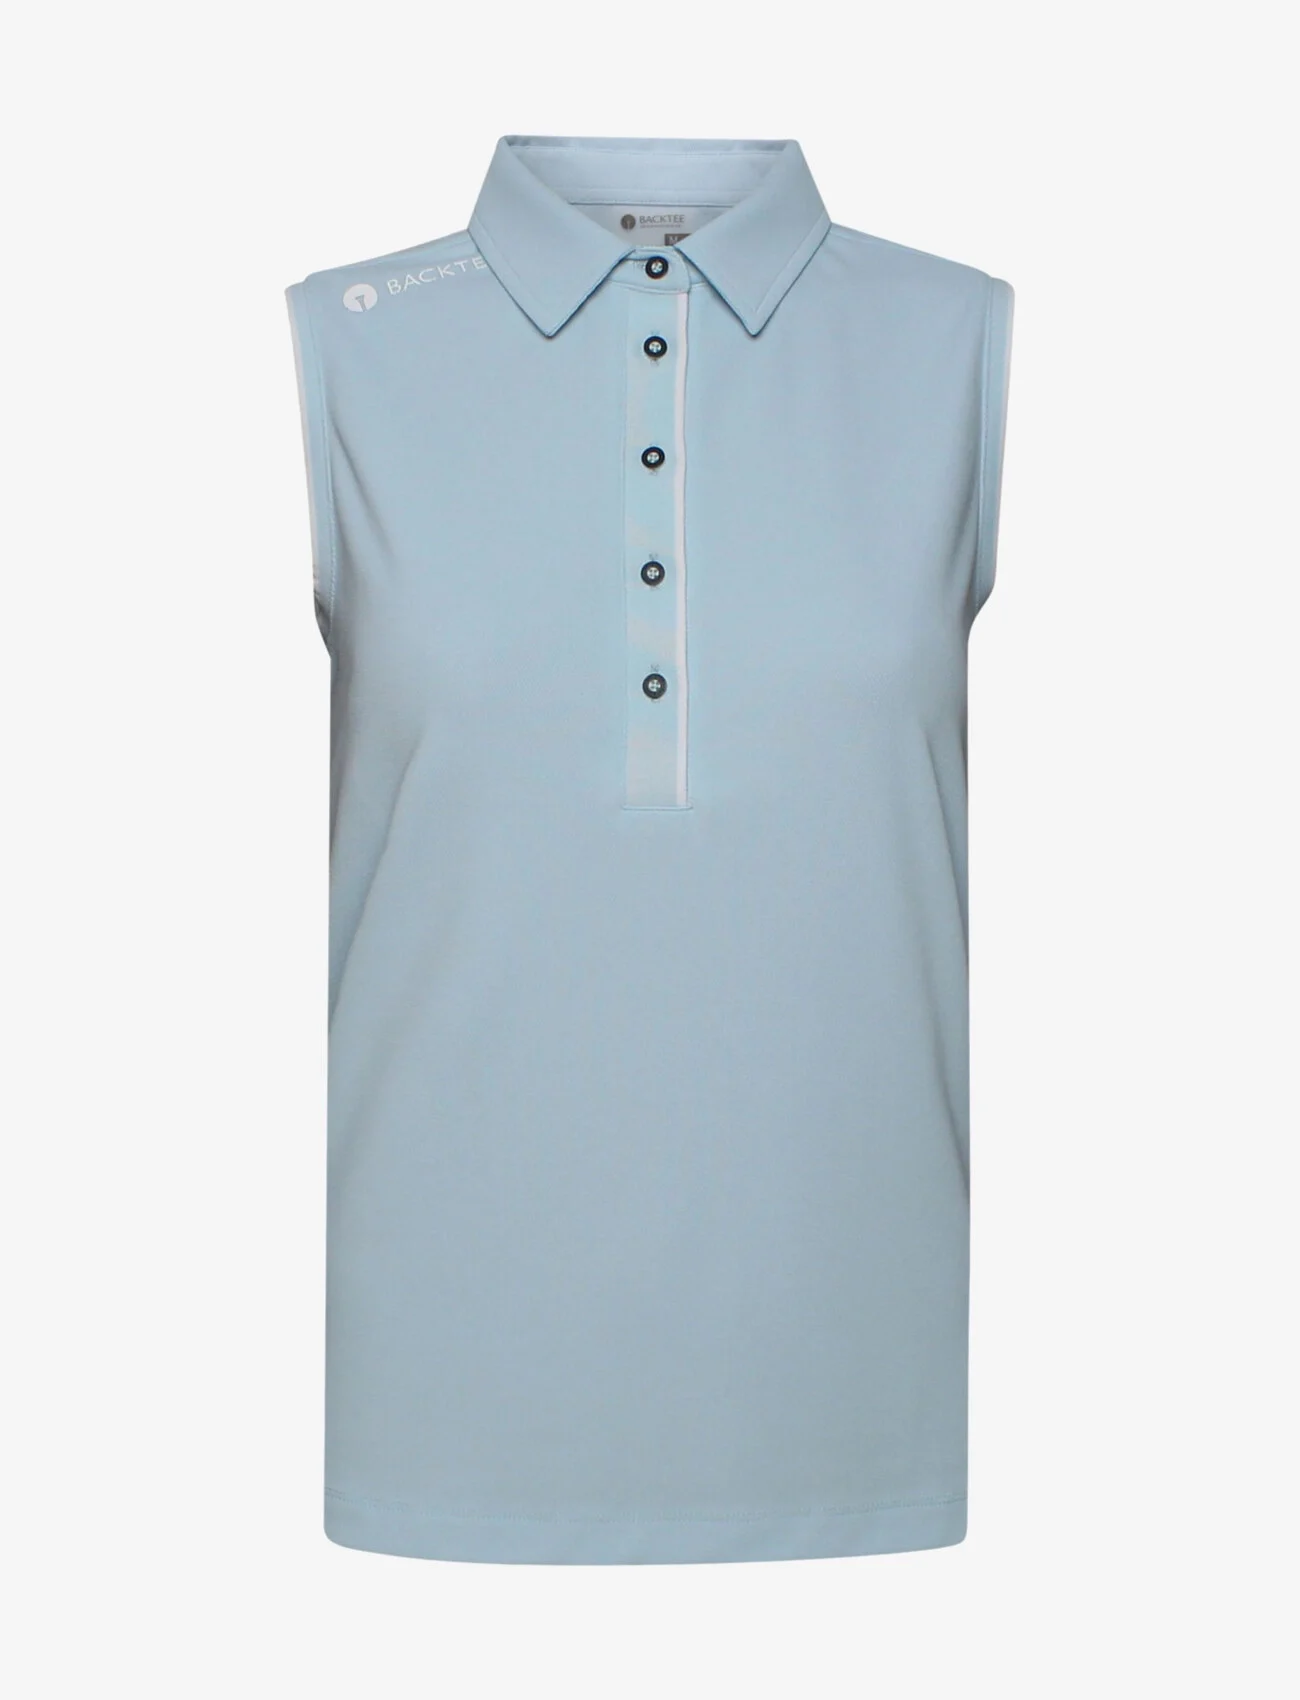 BACKTEE - Ladies Classic Top - poloshirts - light blue - 0